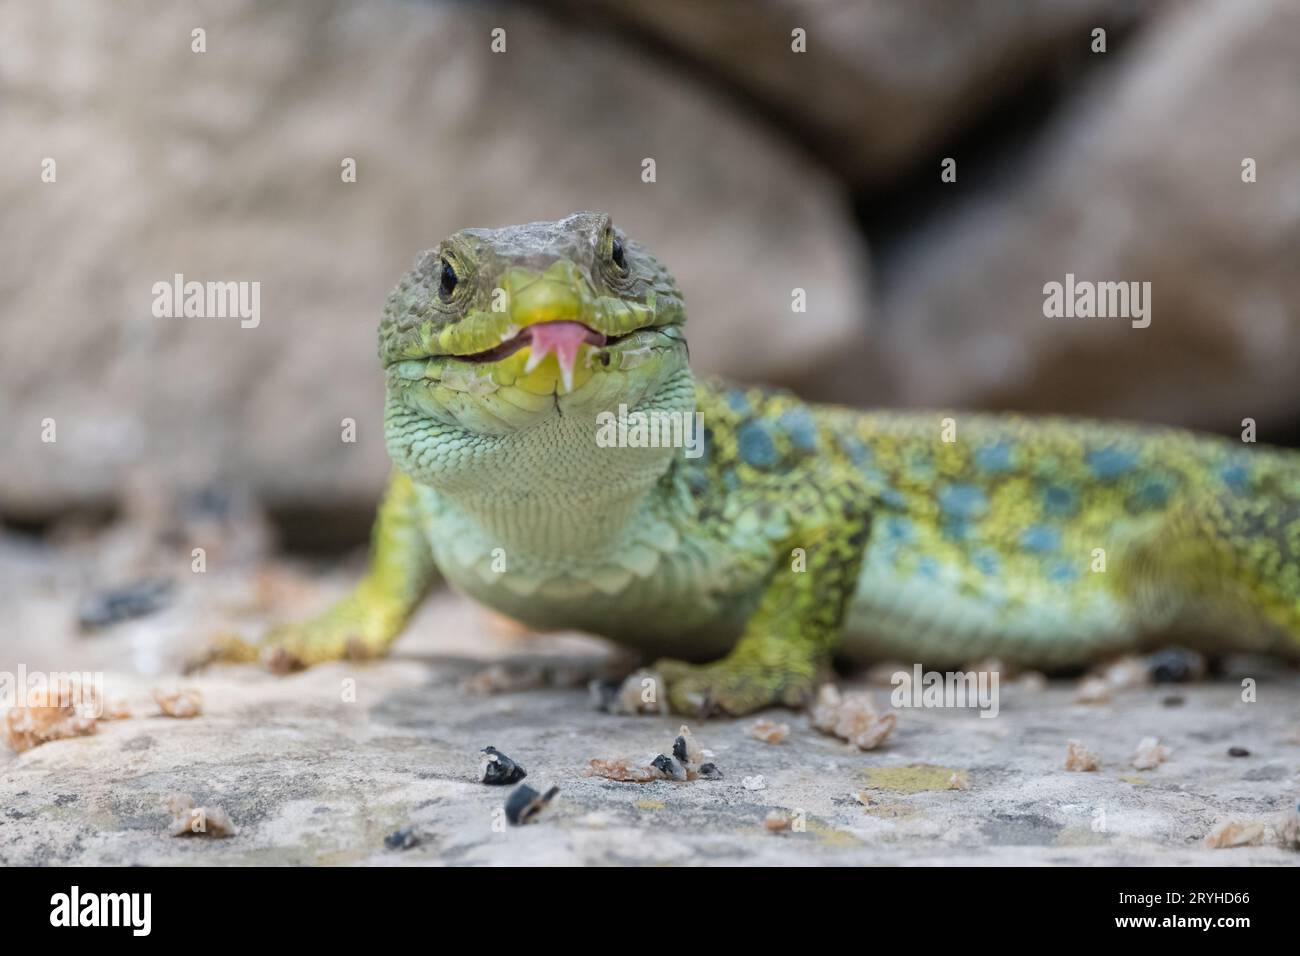 jewelled lizard, Timon lepidus, on a rock sticking out tongue, Lleida, Catalonia, Spain Stock Photo